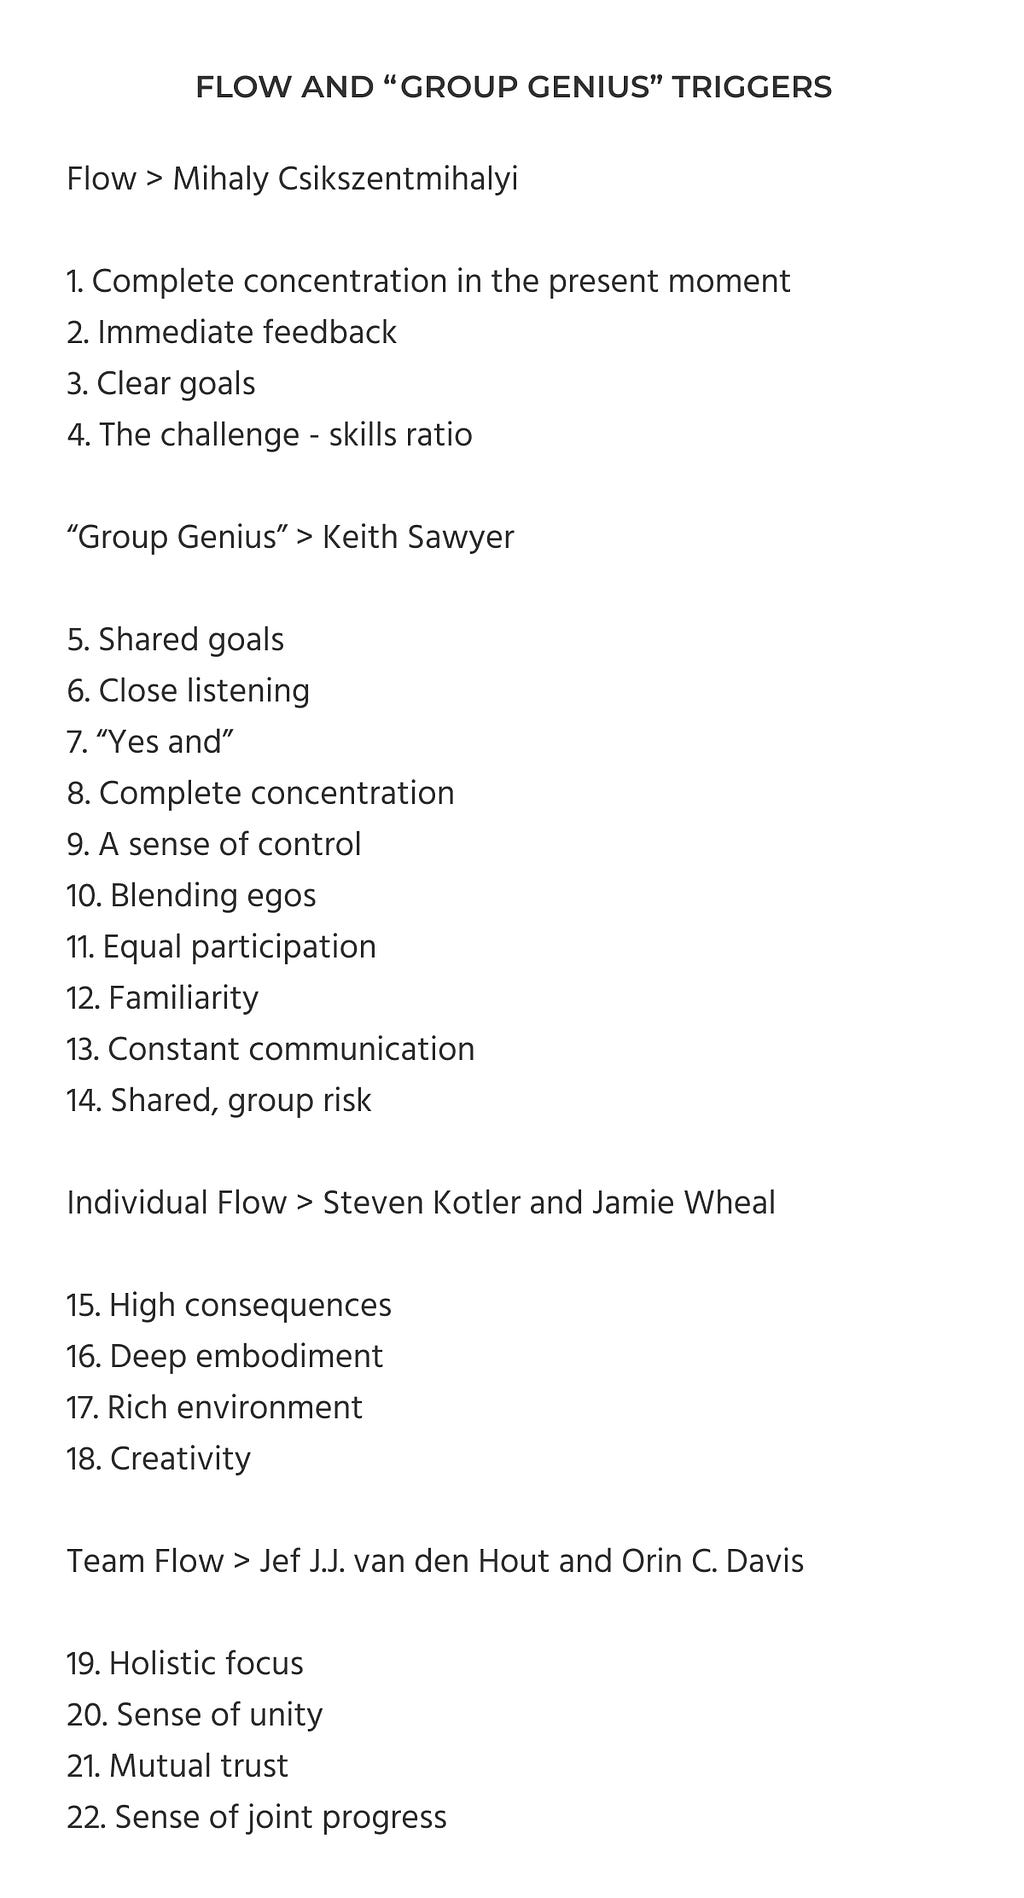 list of triggers for flow and “group genius”